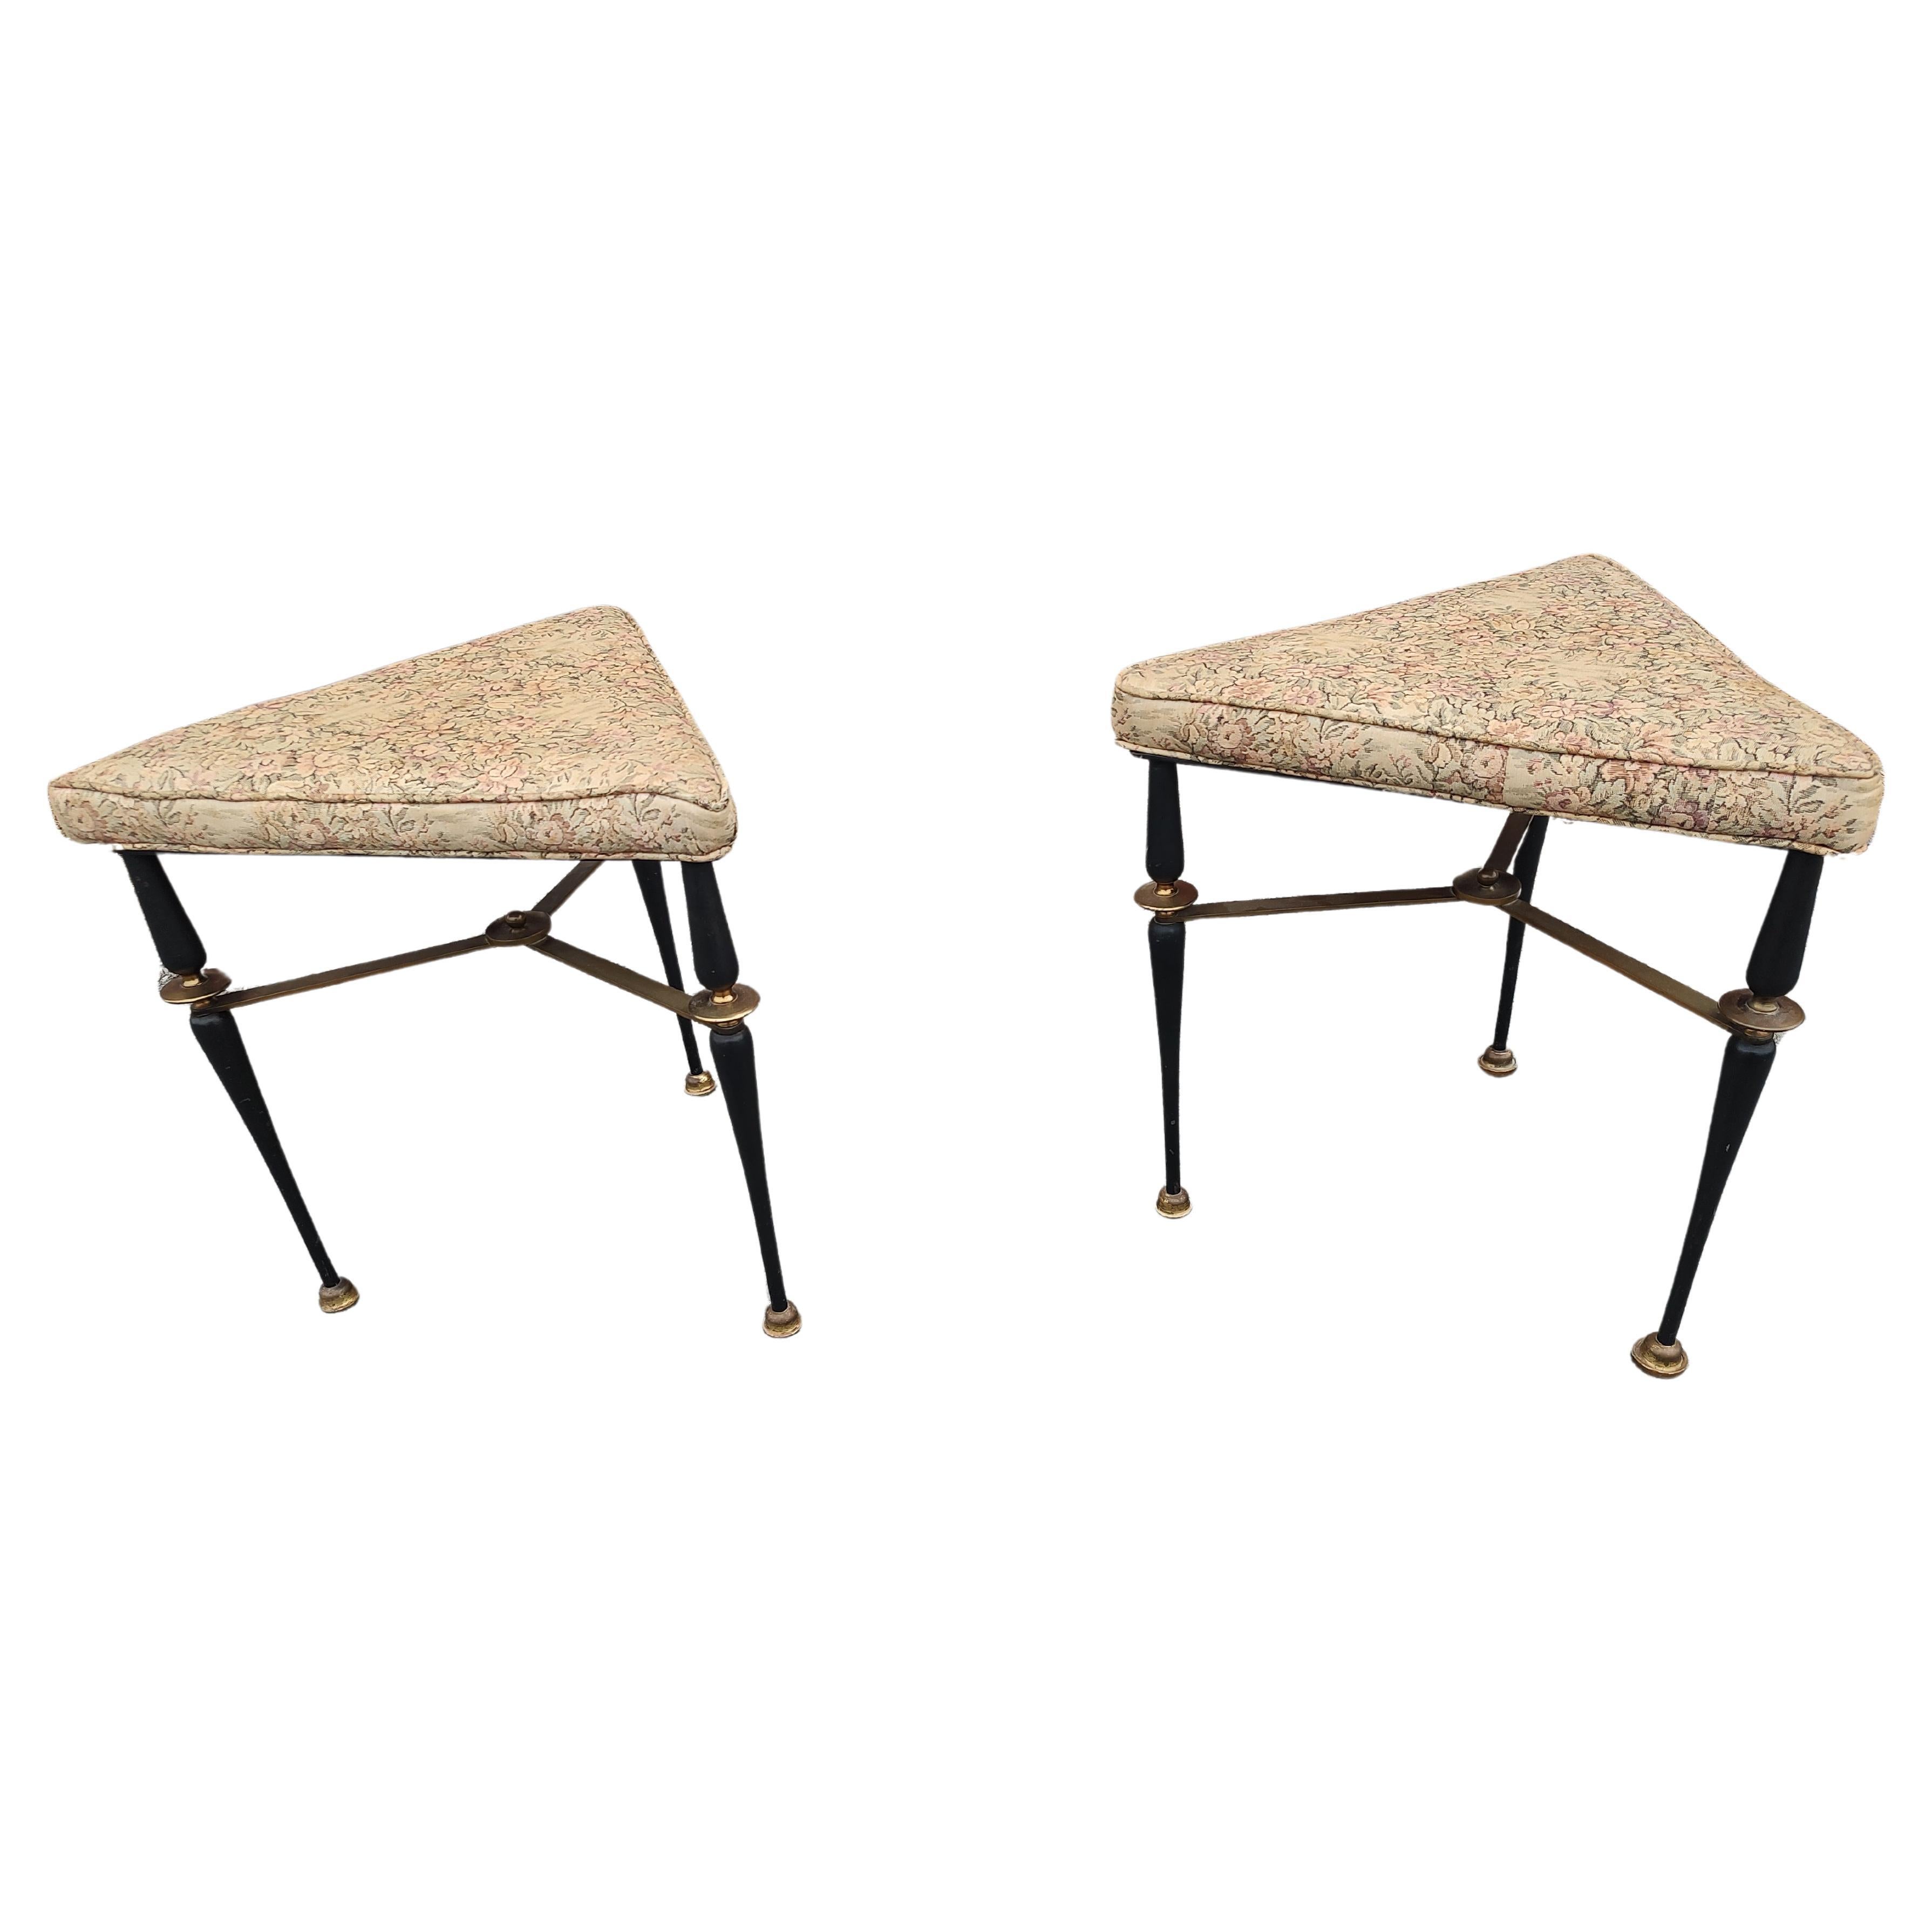 Mid-Century Modern Pair of Triangular Benches Brass & Iron Attributed to Robs Johns Gibbons C1955